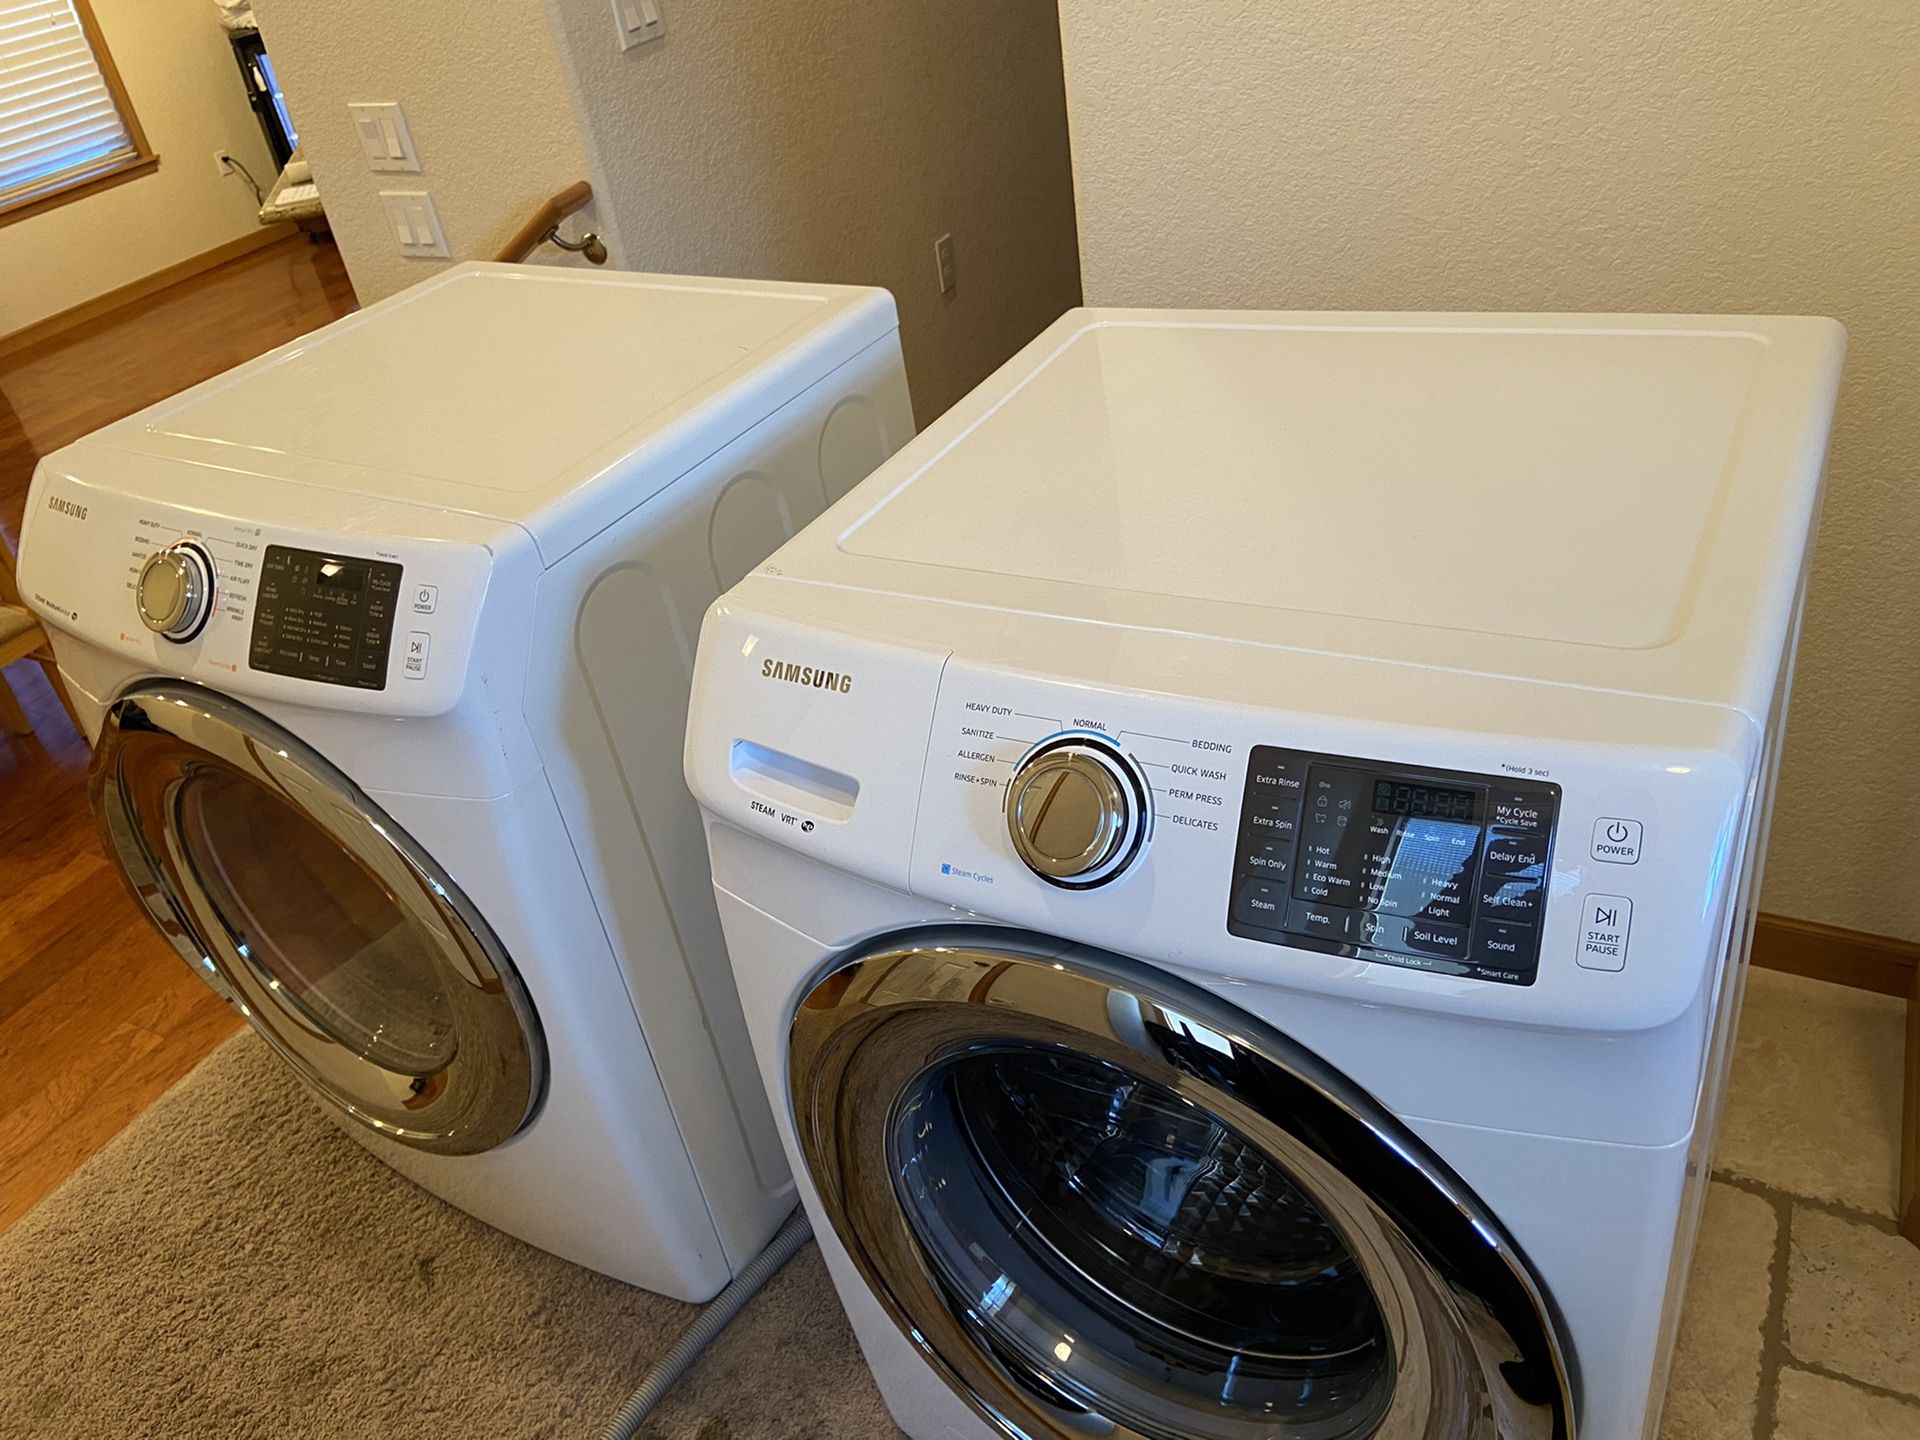 Samsung Washer and Dryer set. $800 OBO